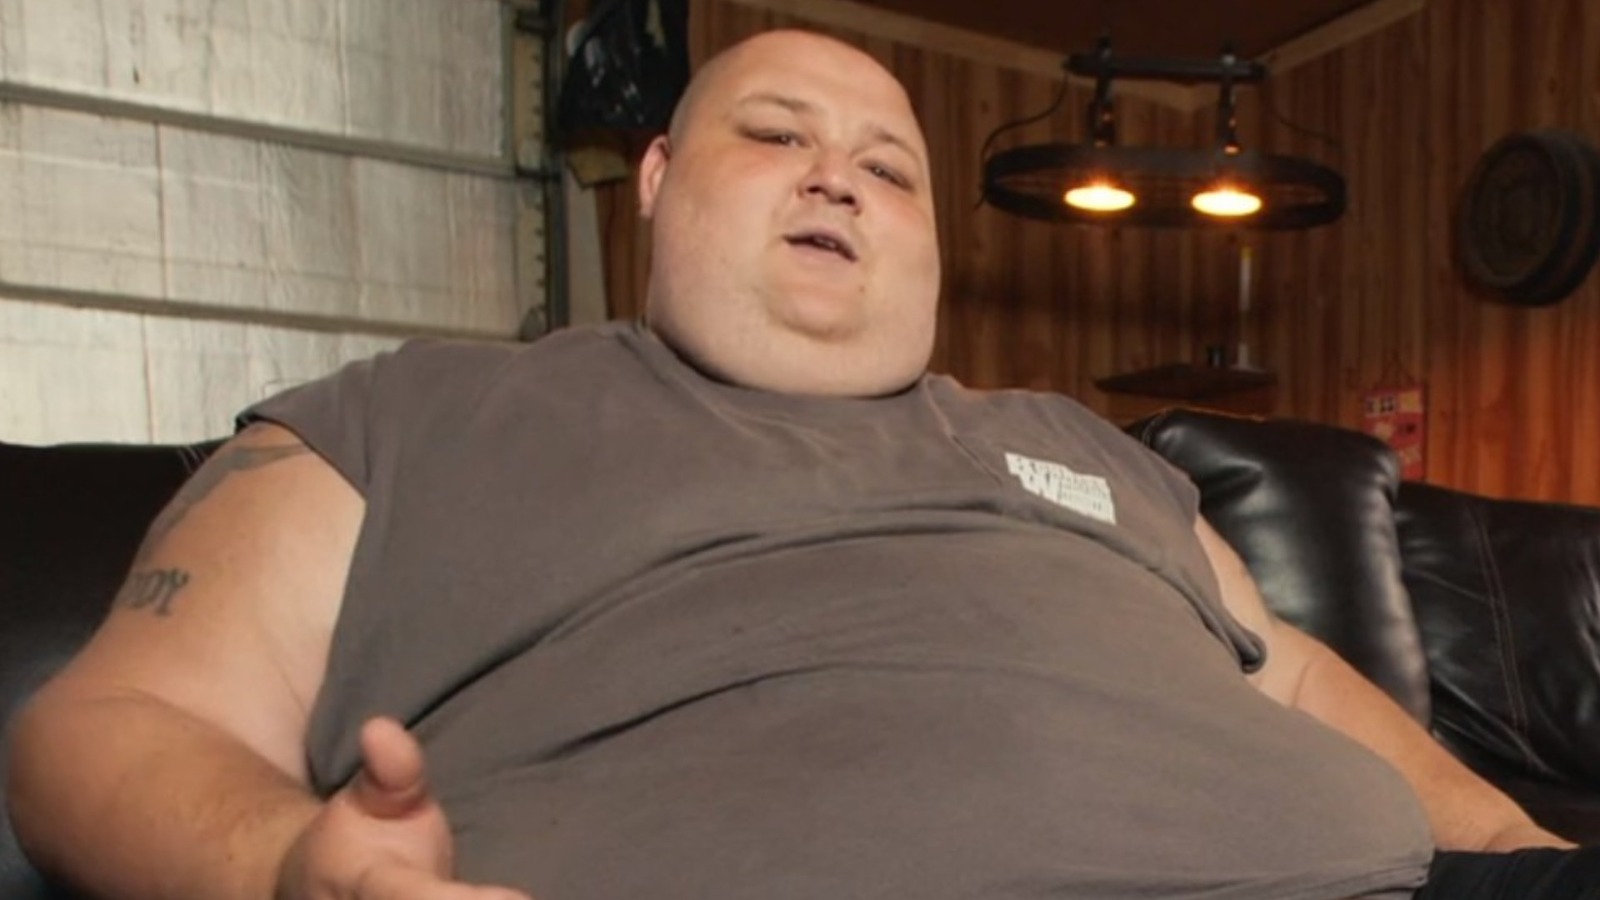 My 600 Lb Life Lawsuit: Dr. Now Sued By Patient For Medical